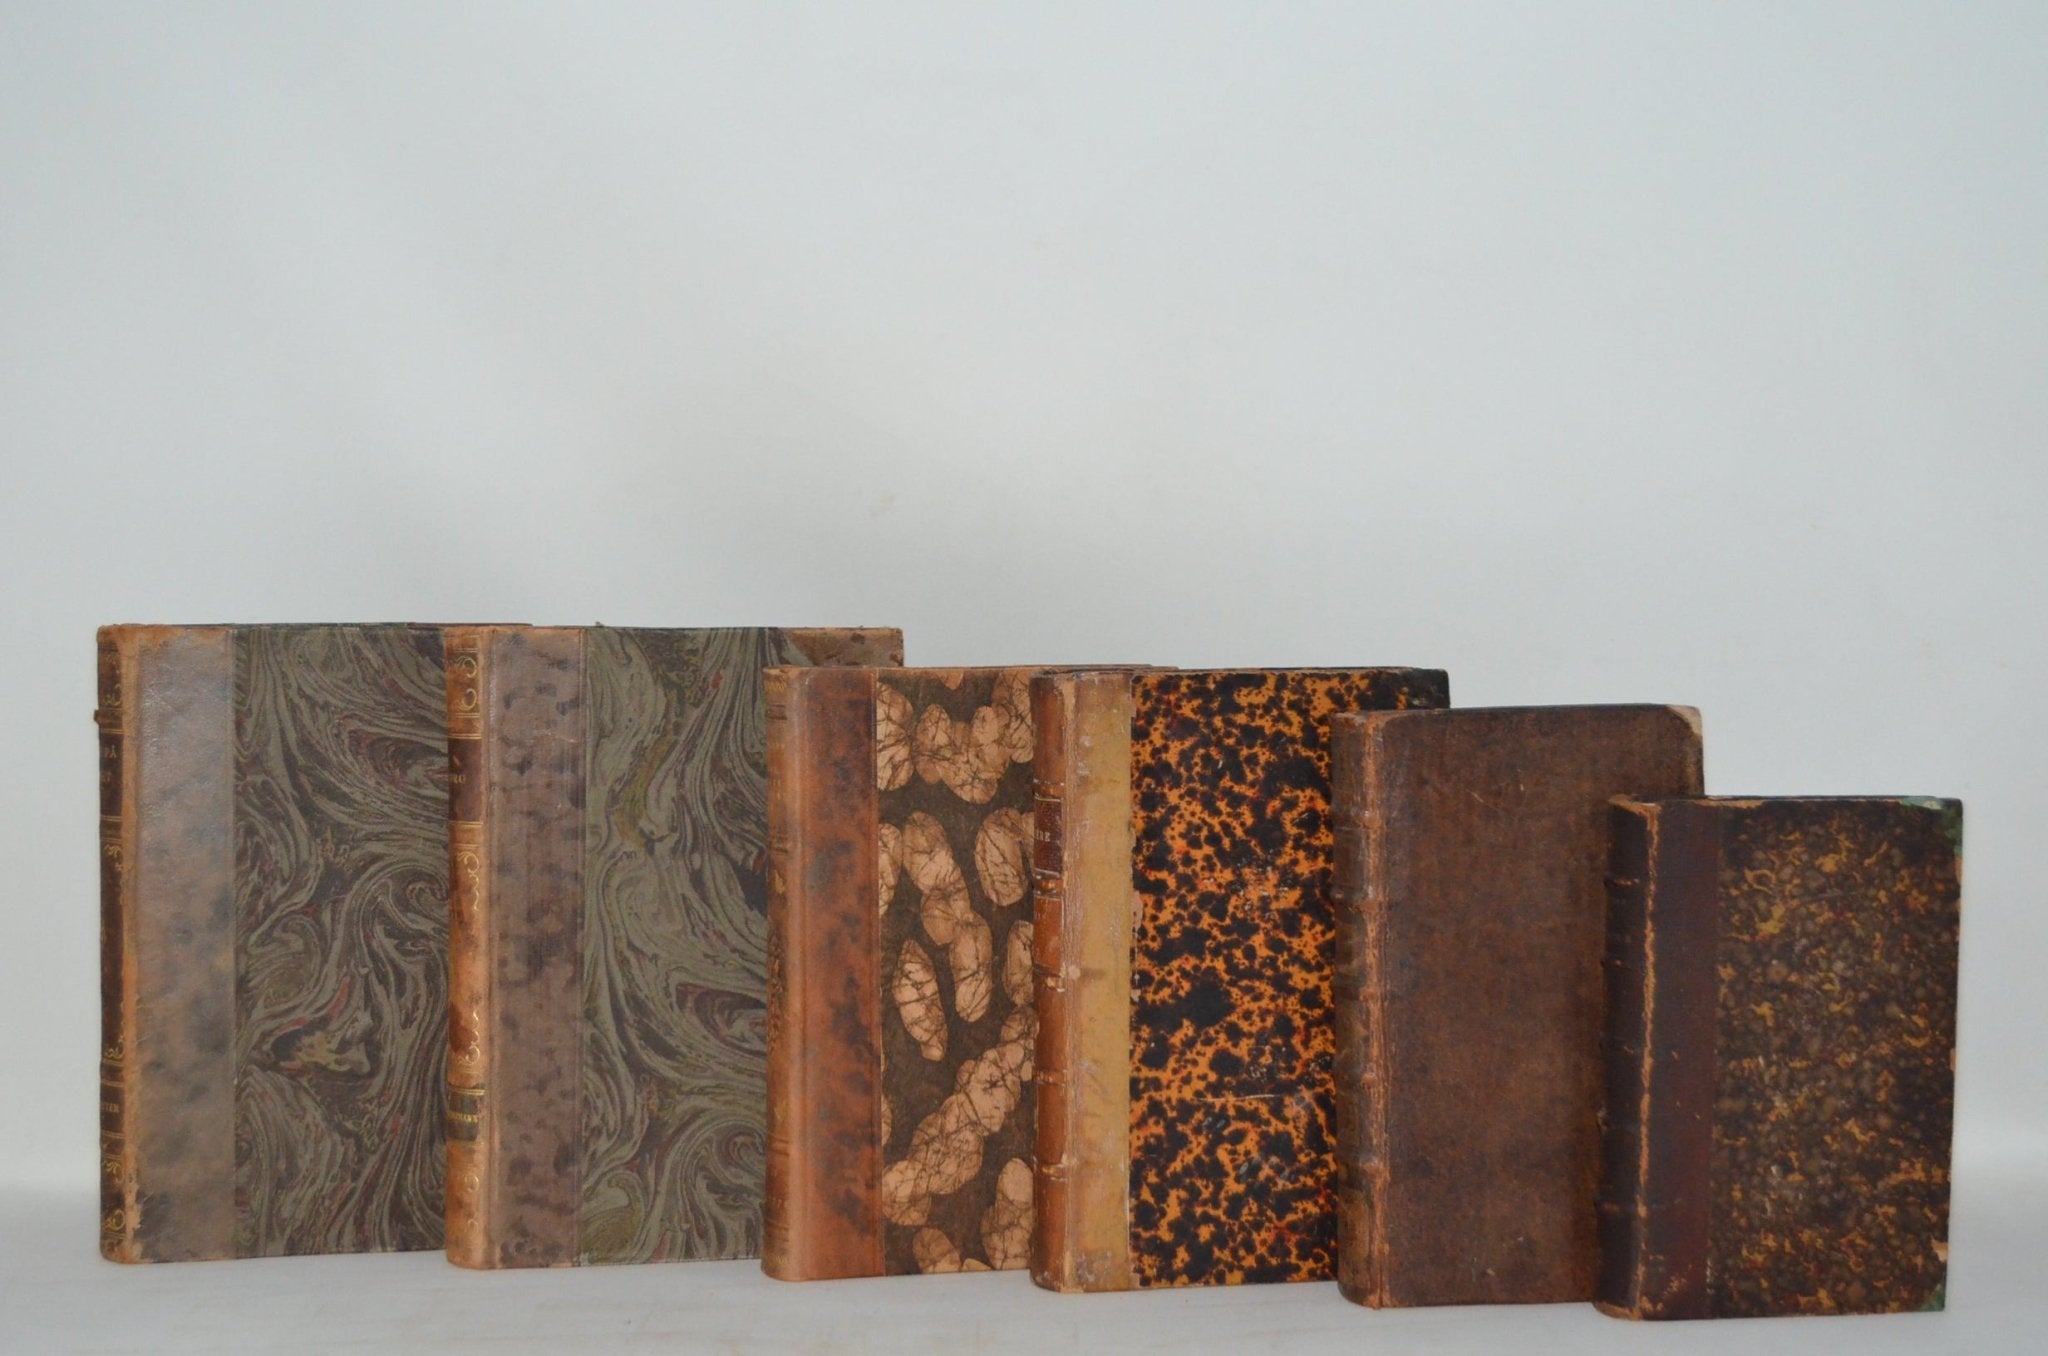 Antique Leather Bound Book Décor – 1 Foot Shades of Brown & Gold - Brookfield Books